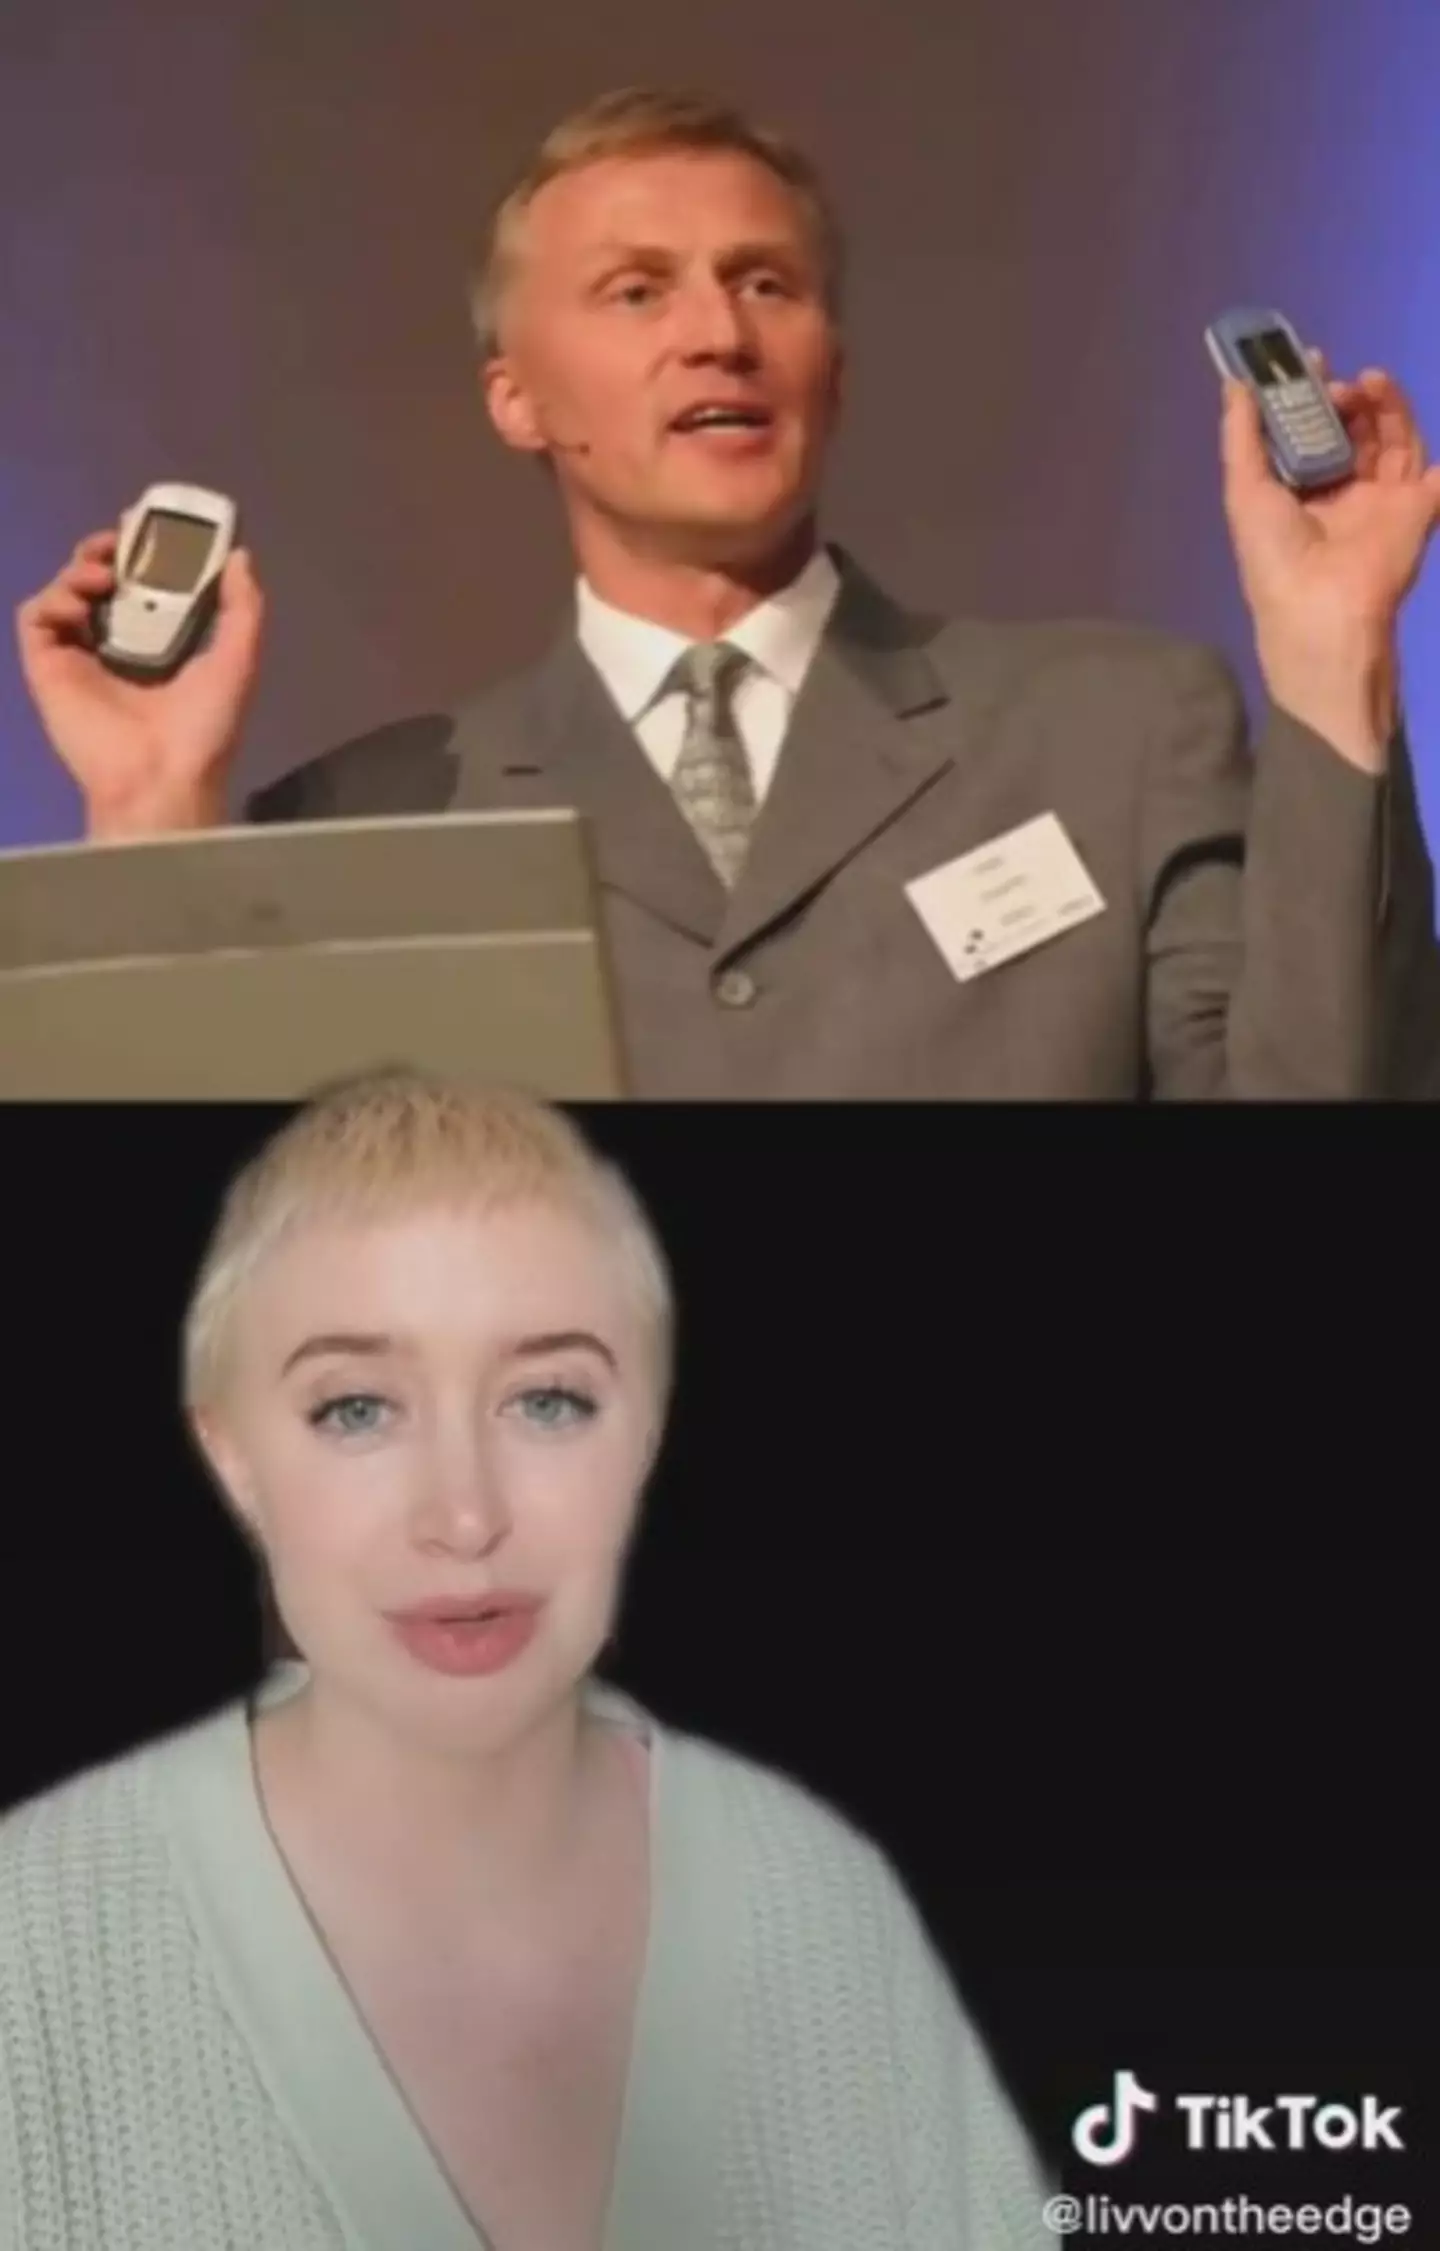 TikTok creator Olivia Snake used Anssi Vanjoki, a director at Nokia, as an example of the fine system.